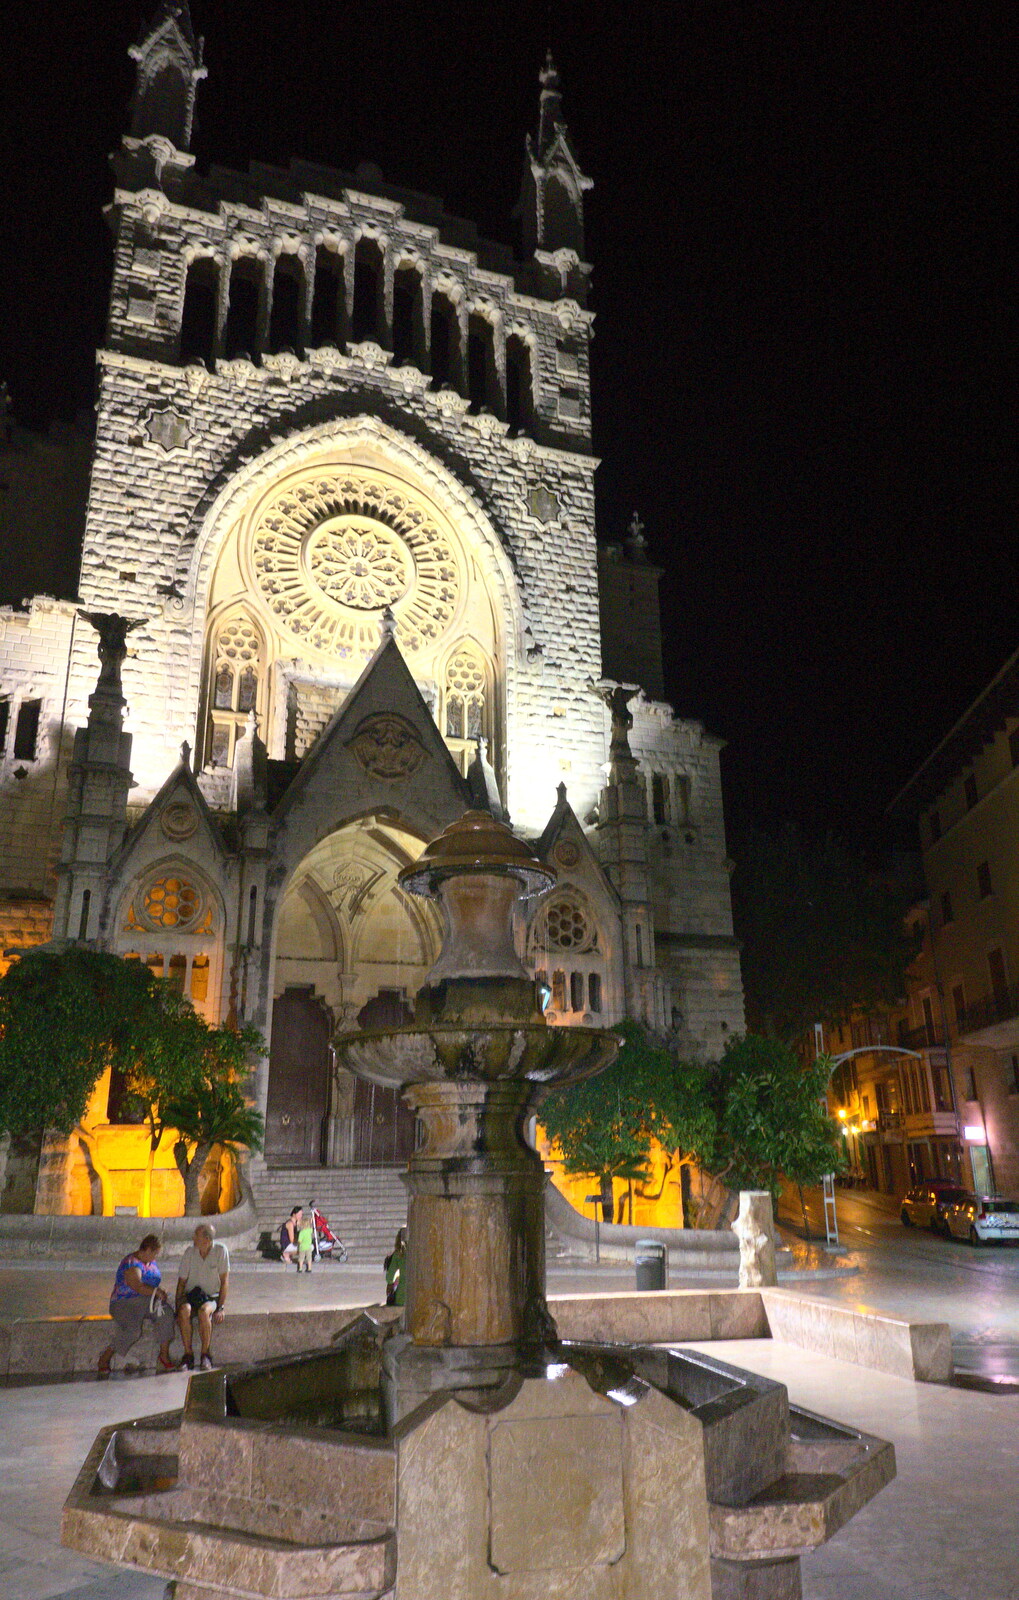 The church at night from A Trip to Sóller, Mallorca, Spain - 8th-14th September 2012